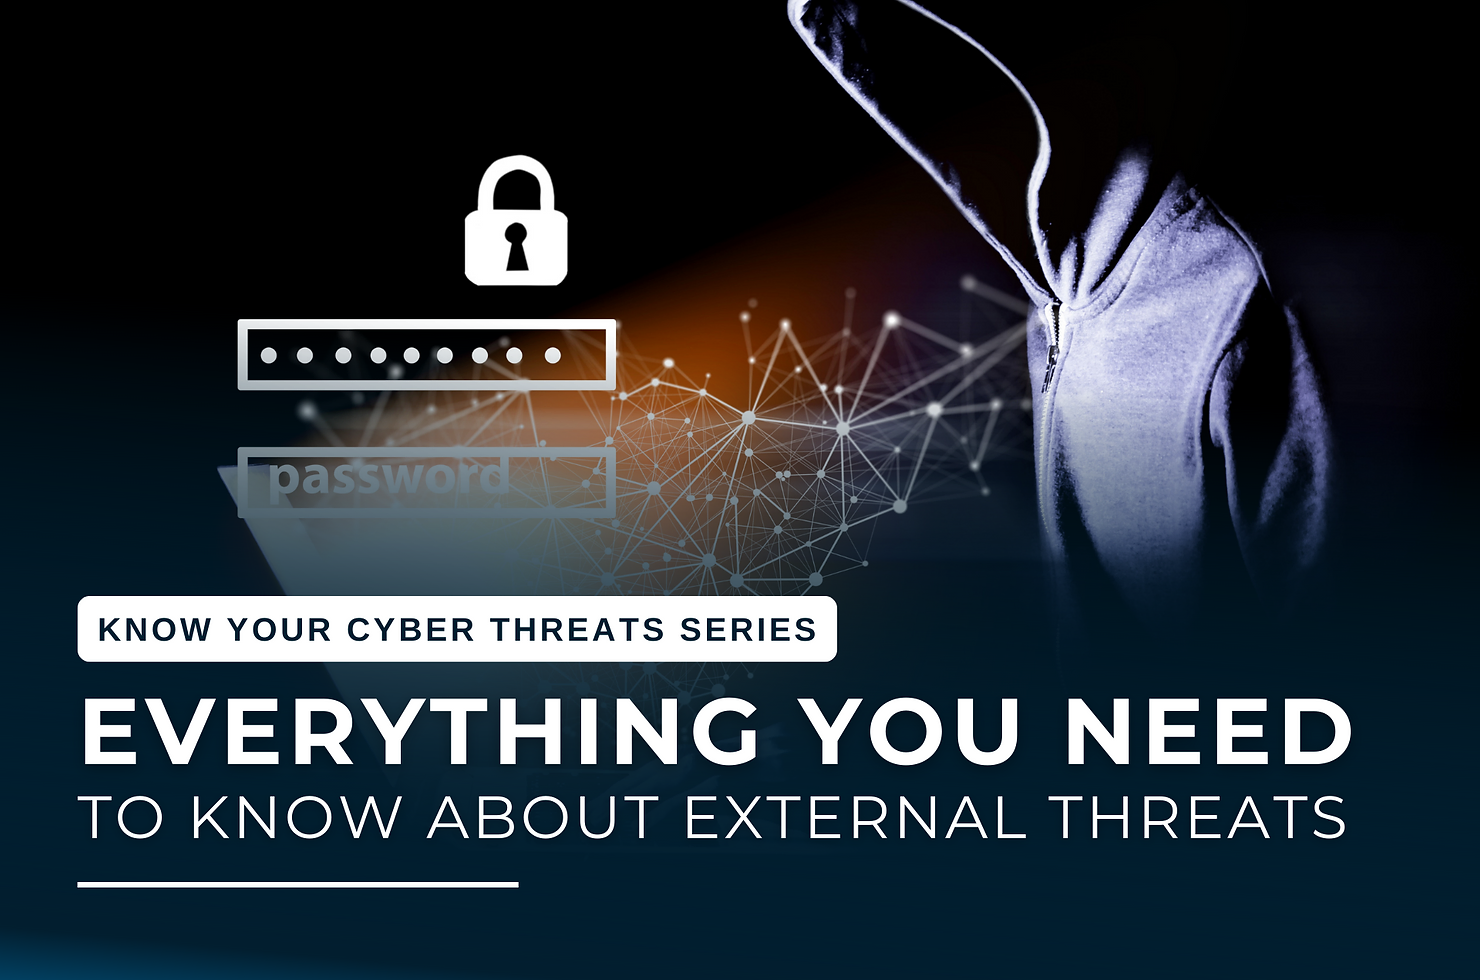 EVERYTHING YOU NEED TO KNOW ABOUT EXTERNAL THREATS